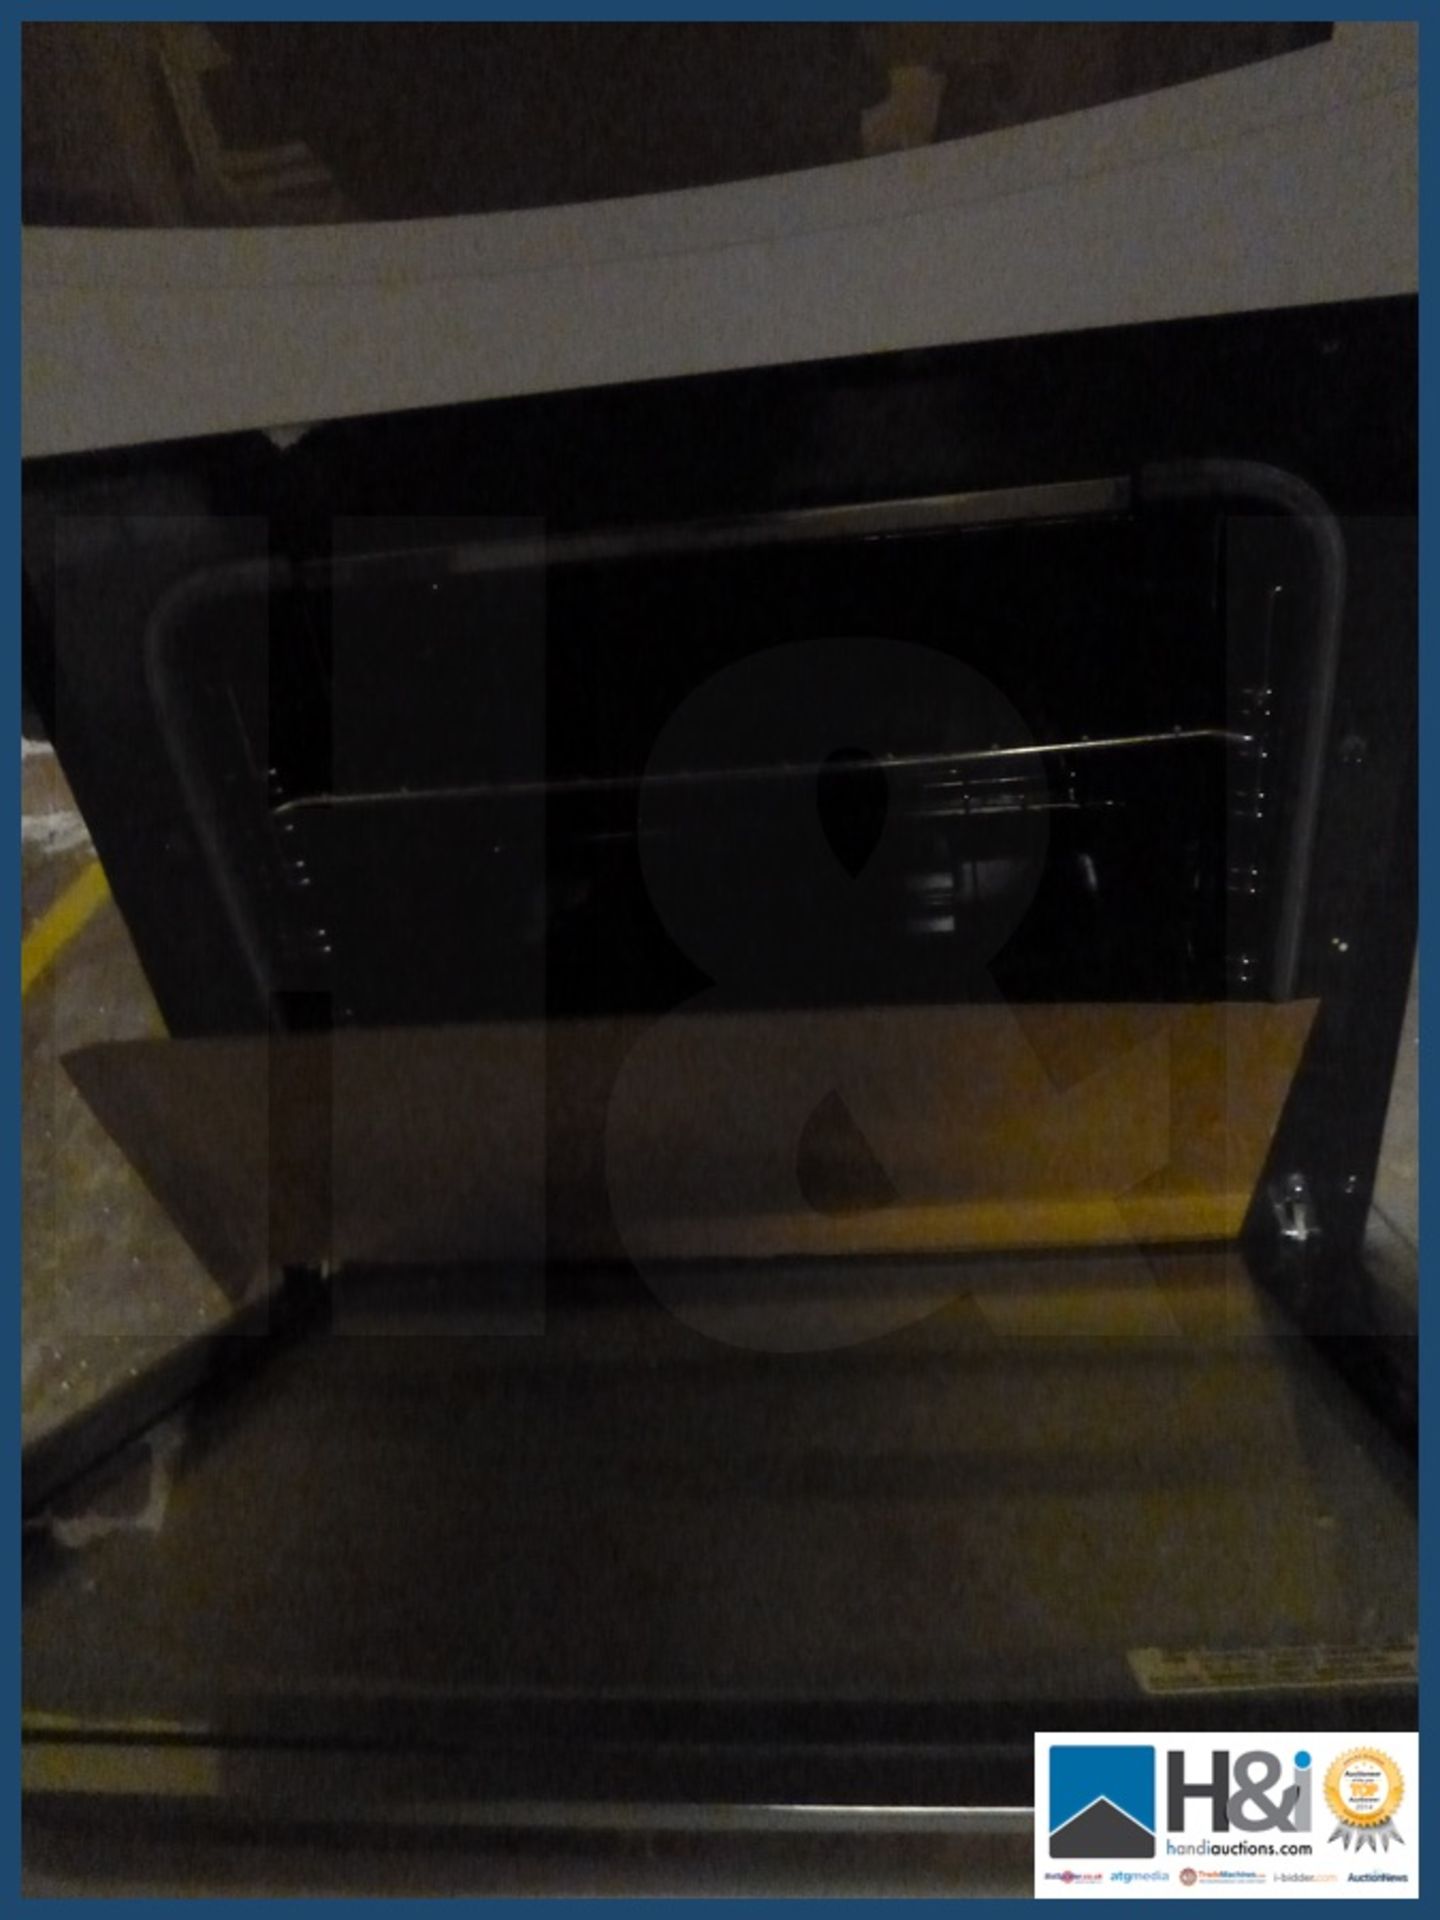 Hygena integrated double gas oven appears unused untested. - Image 3 of 3